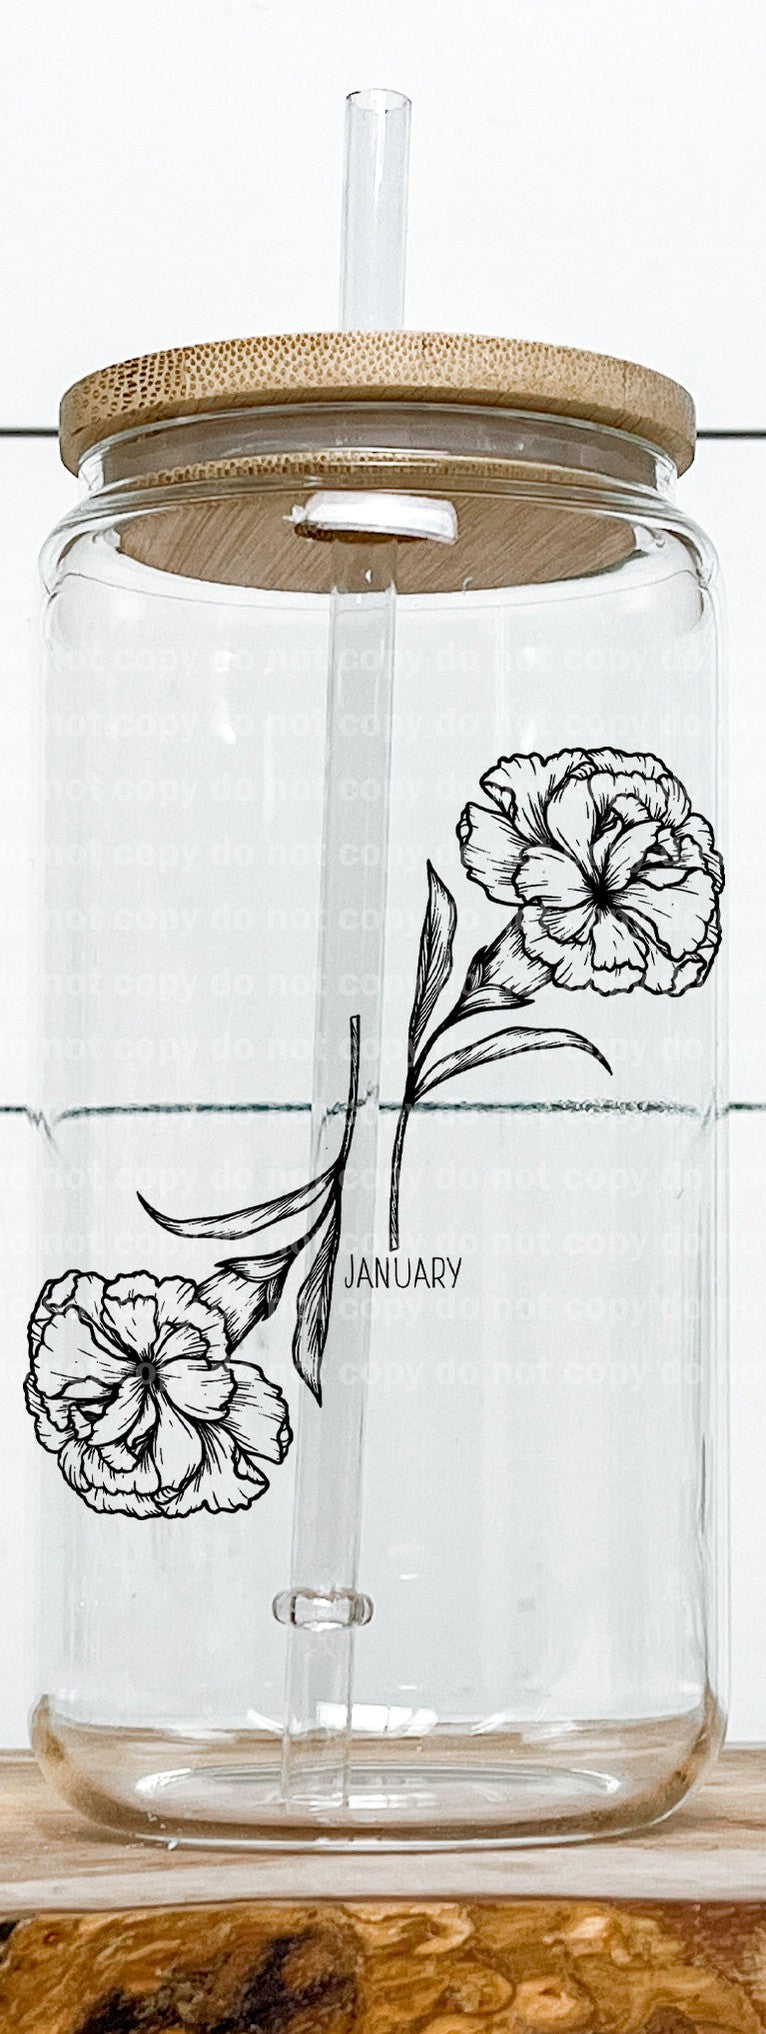 January Birth Flowers Black/White Dream Print or Sublimation Print with Decal Option